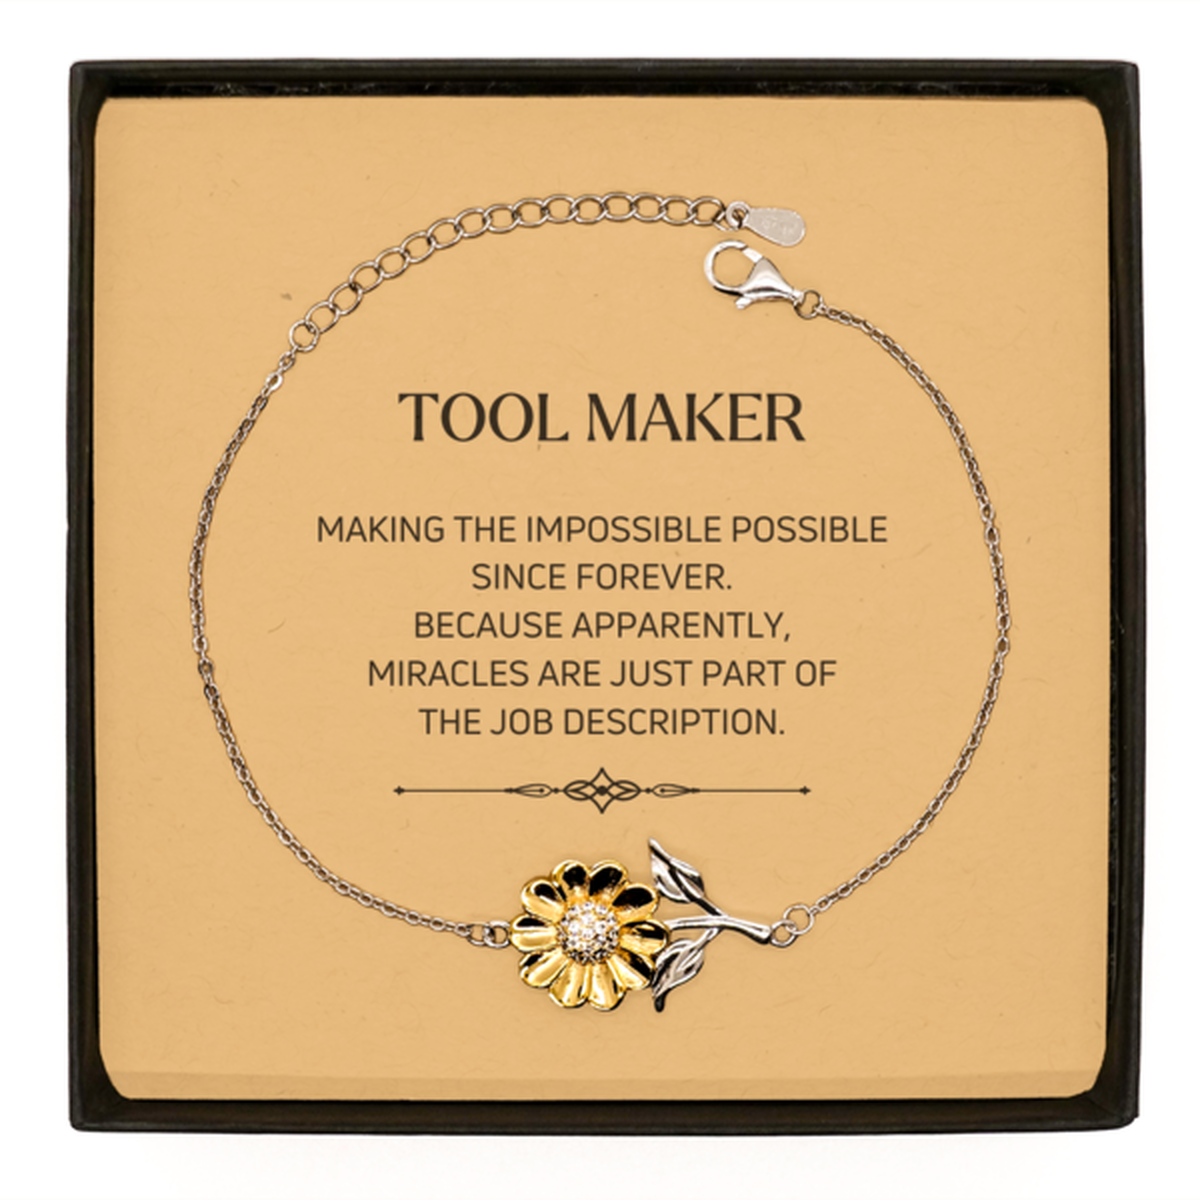 Funny Tool Maker Gifts, Miracles are just part of the job description, Inspirational Birthday Sunflower Bracelet For Tool Maker, Men, Women, Coworkers, Friends, Boss